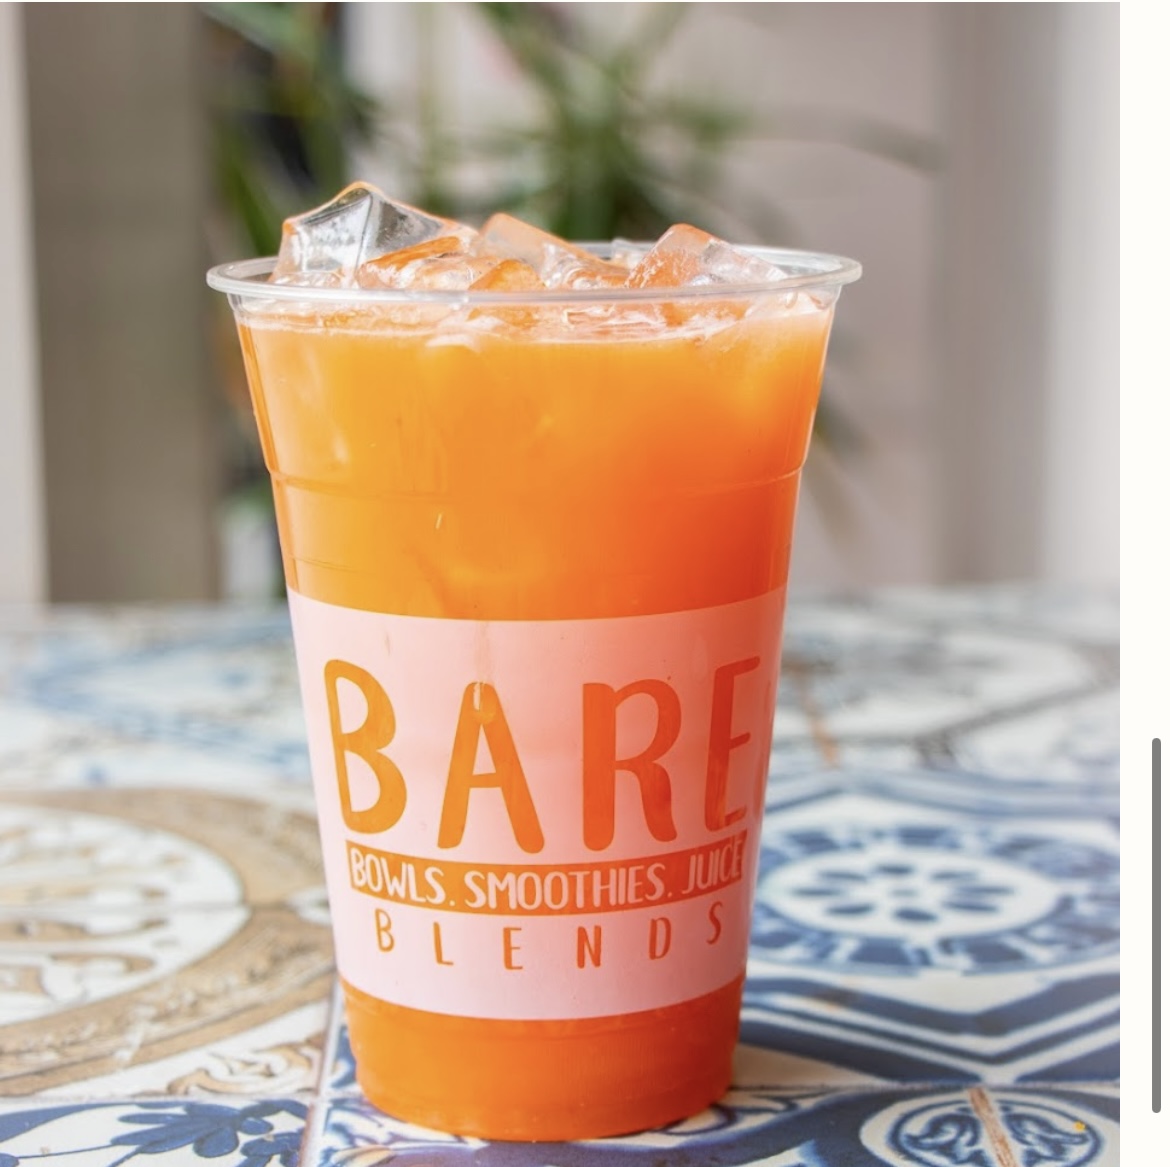 Gluten-Free at BARE Blends